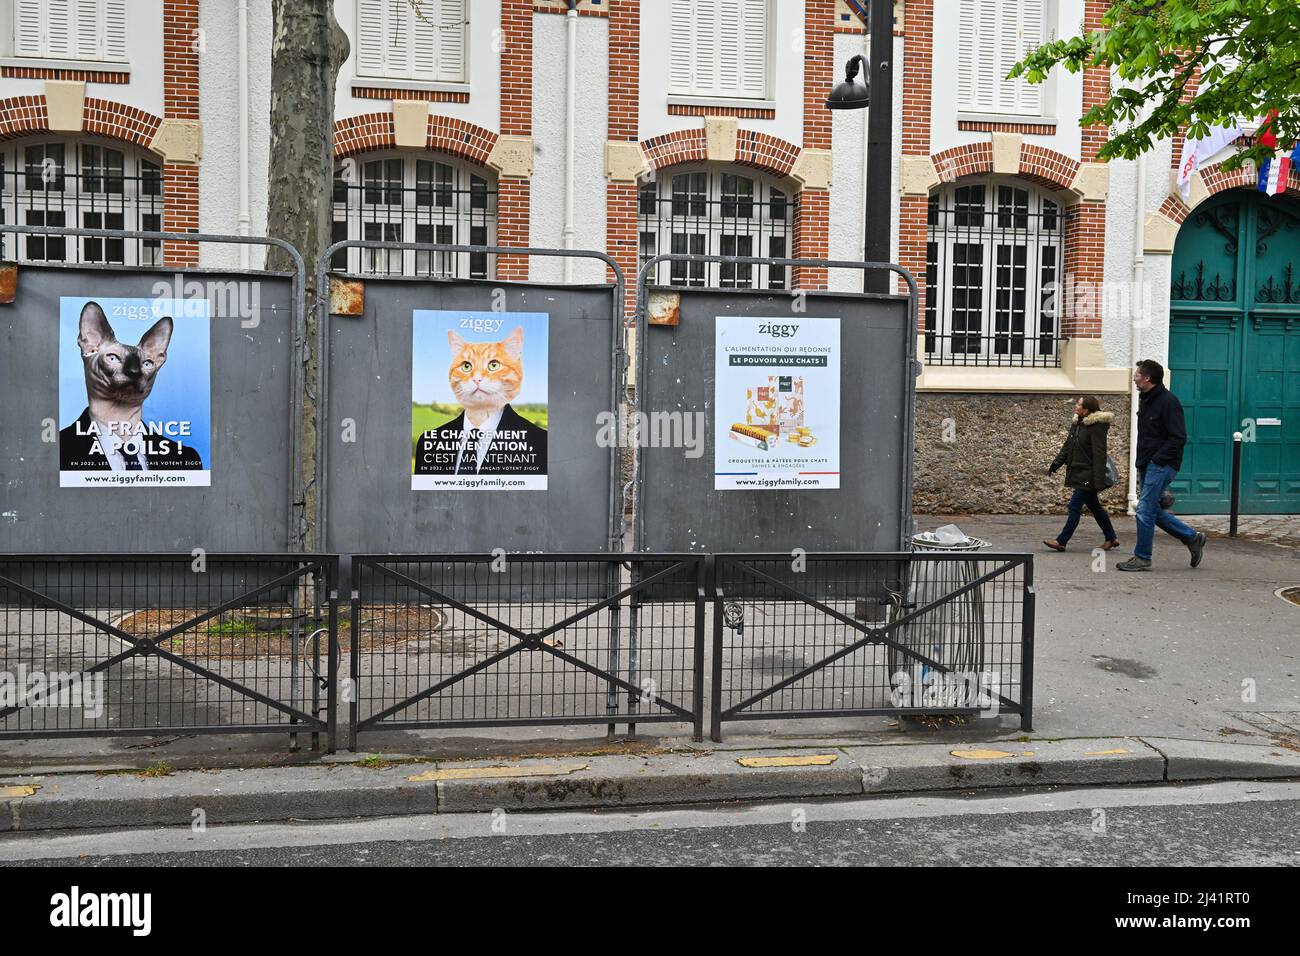 Cat food brand Ziggy imitates Presidential election campaign posters in Paris, France on Apr. 9, 2022. (Photo by Lionel Urman/Sipa USA) Stock Photo